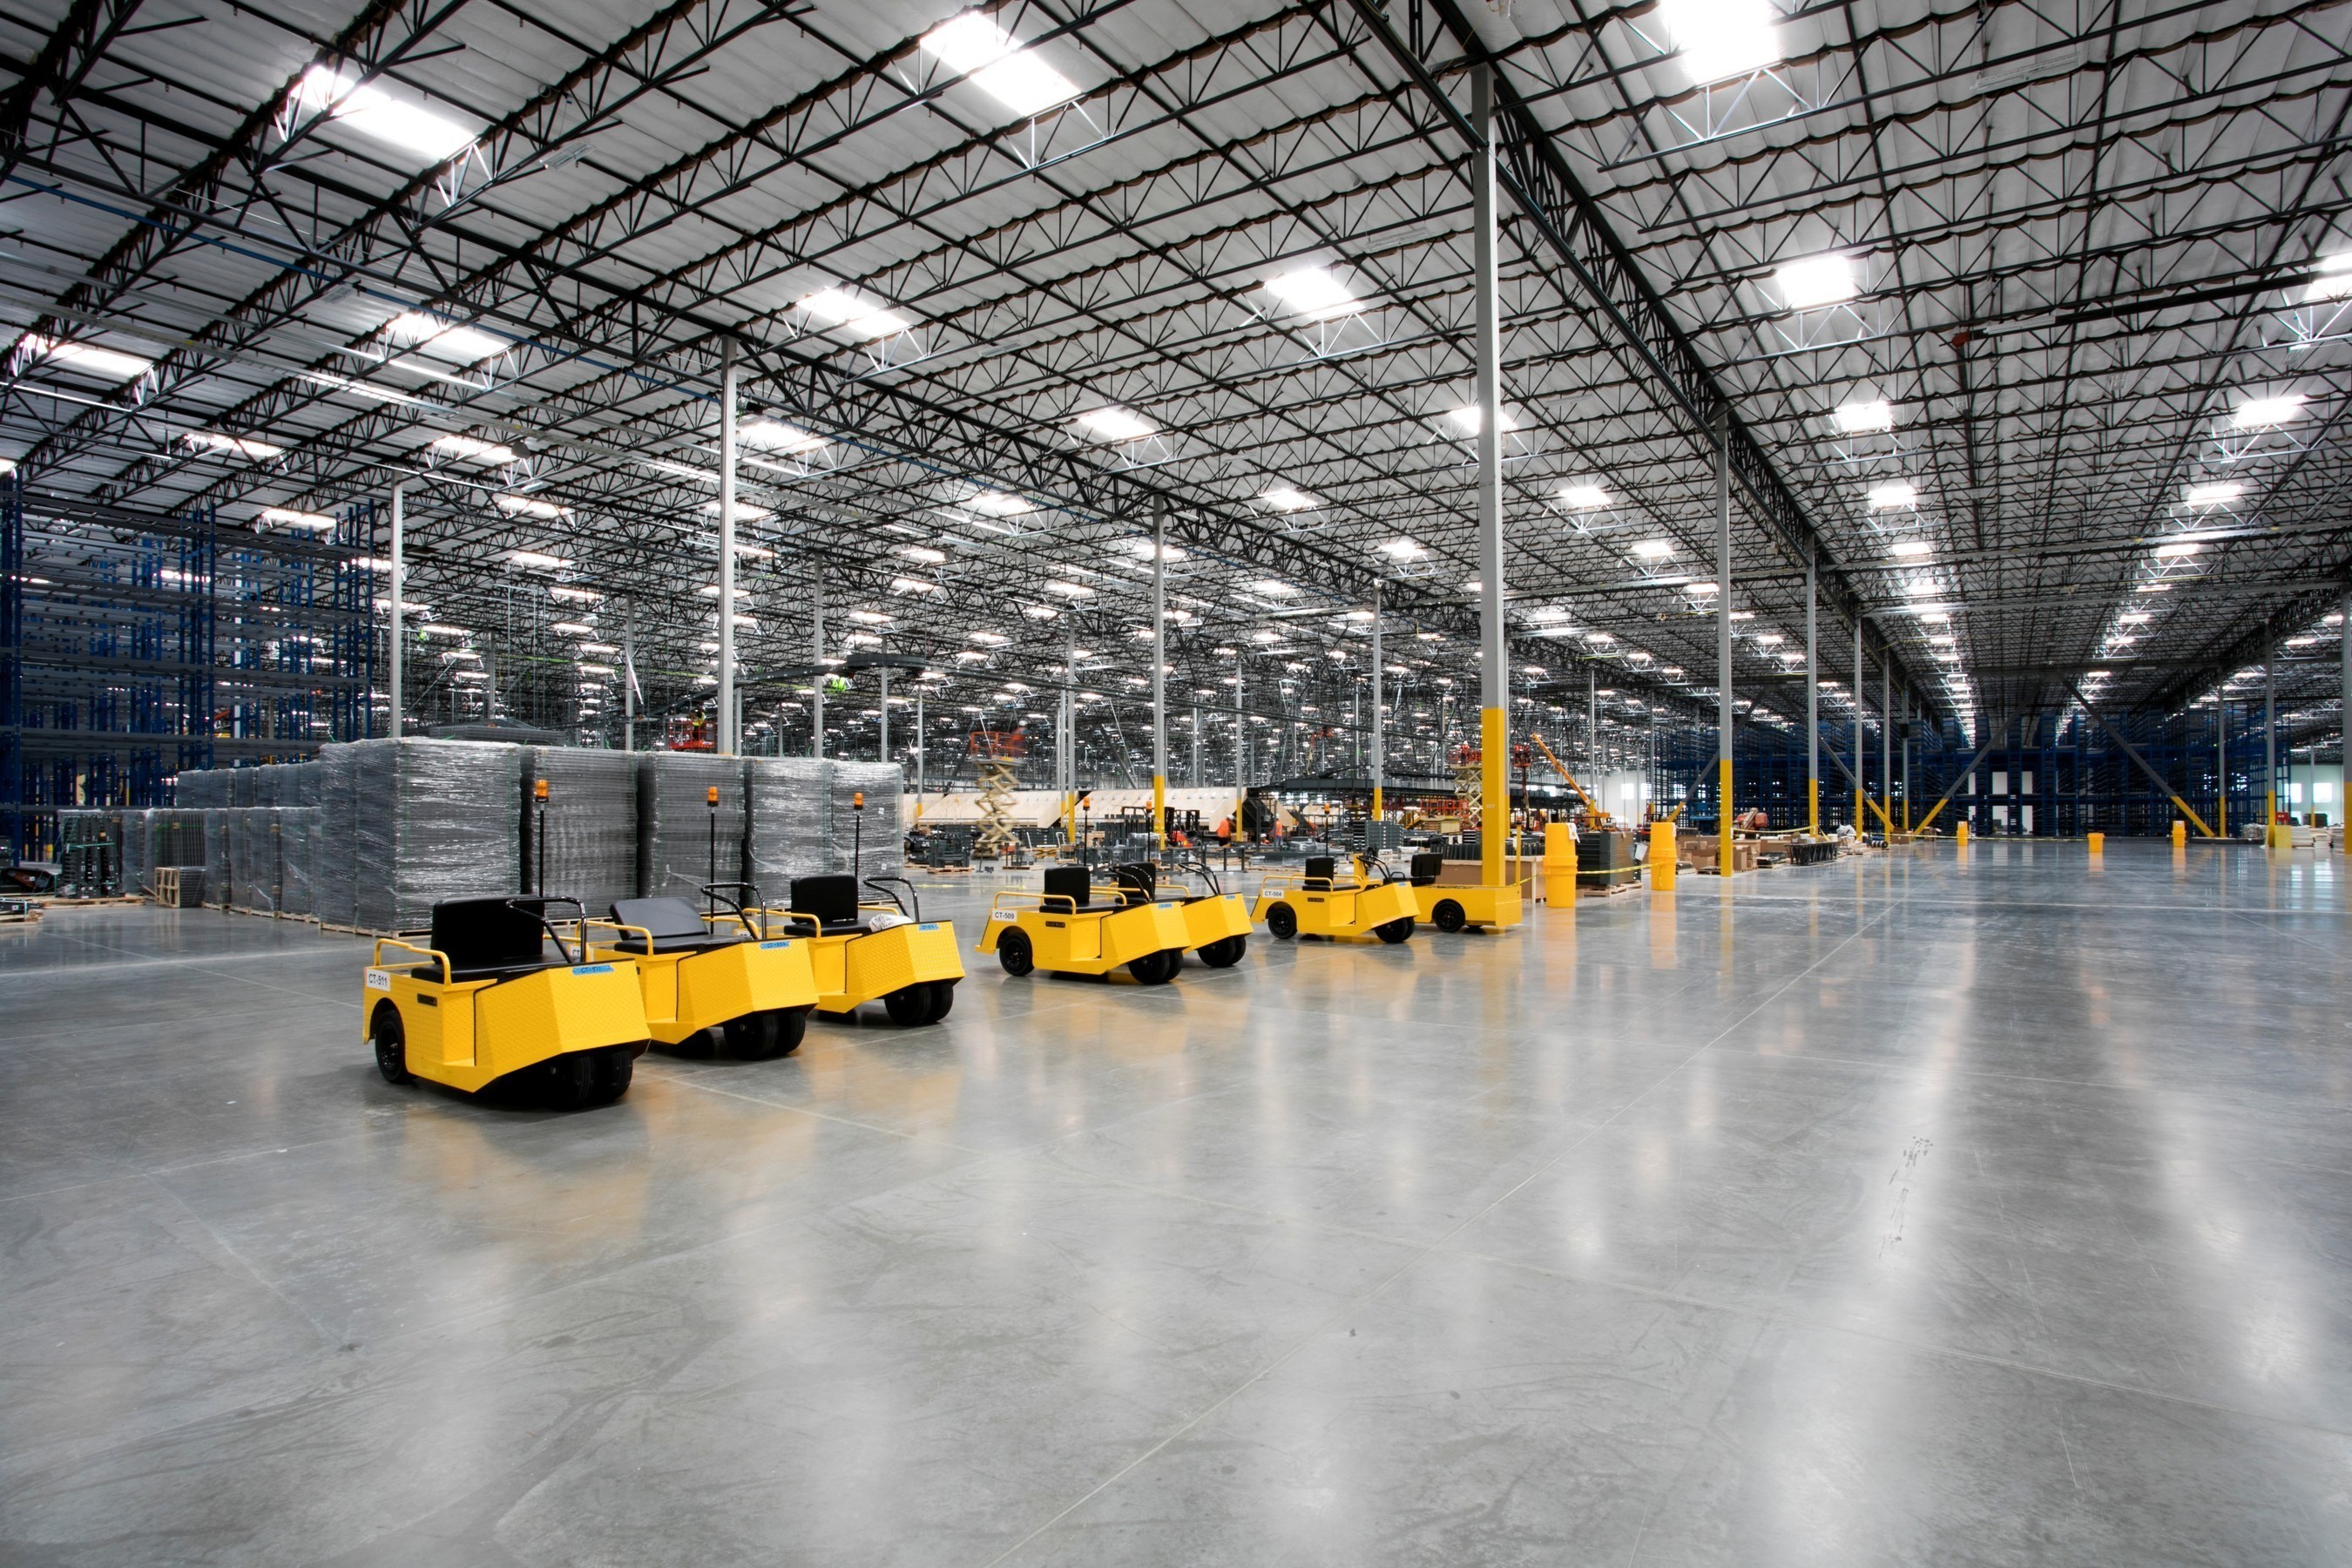 The 1 million square foot facility is expected to accommodate approximately 20 percent of QVC's total U.S. shipments, with plans to store and ship all product categories - from fashion and beauty products to big ticket items like TVs, computers and housewares. (Photo credit: Cari Guerin)